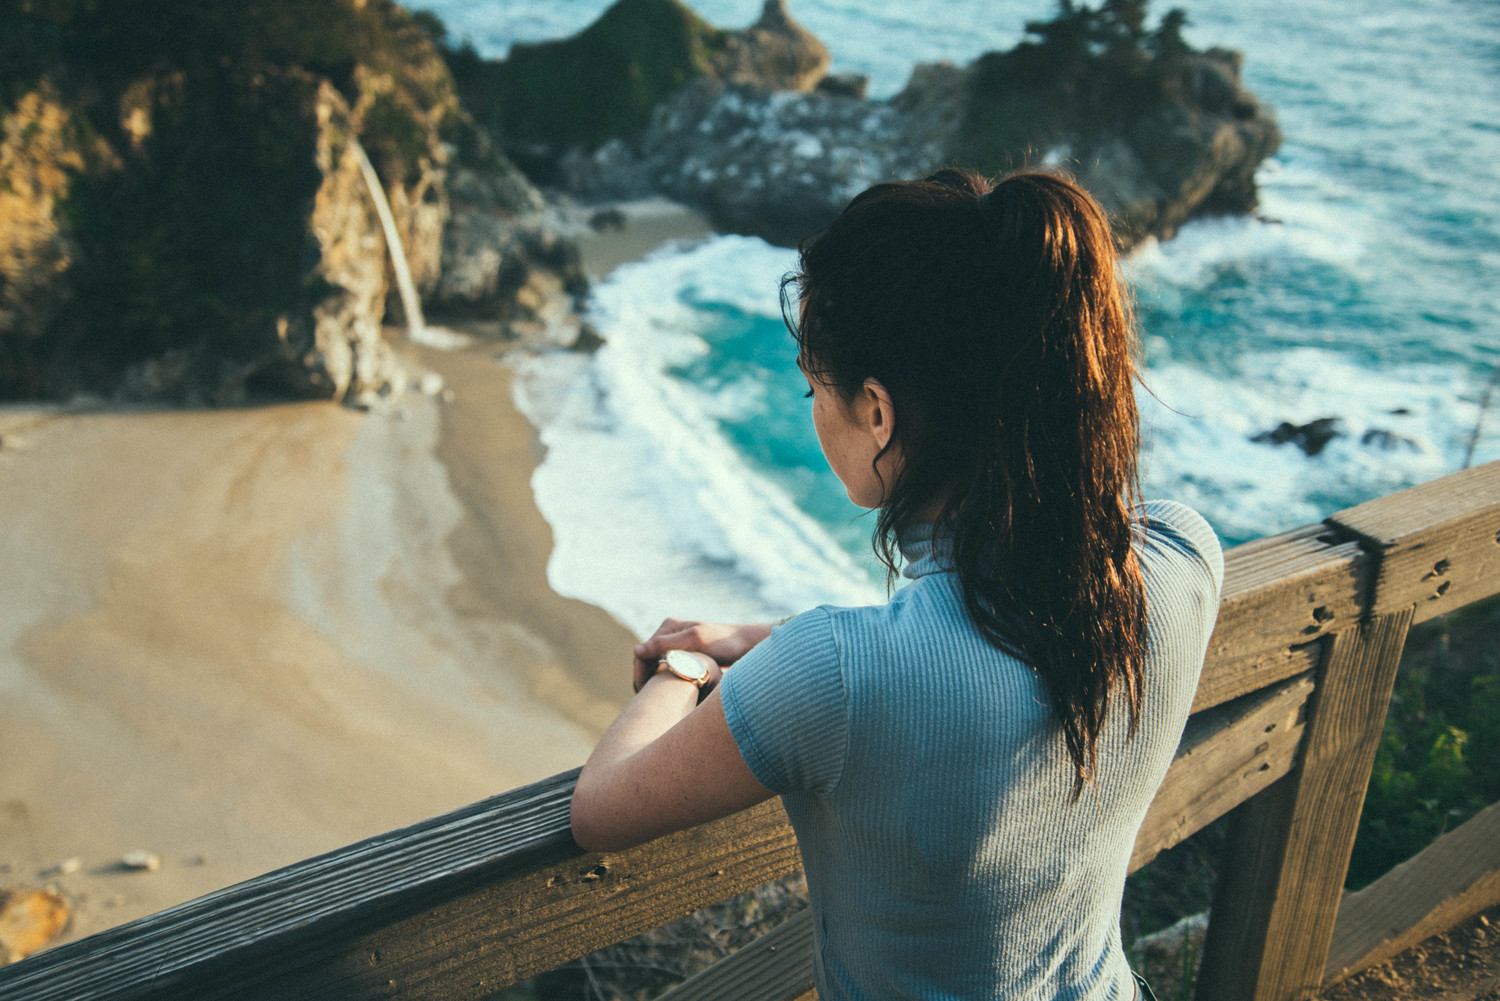 People 1500x1001 Noel Alvarenga women women outdoors back looking into the distance Chill Out sea sand photography landscape ponytail wristwatch young women Big Sur McWay Falls California USA Megan Costley